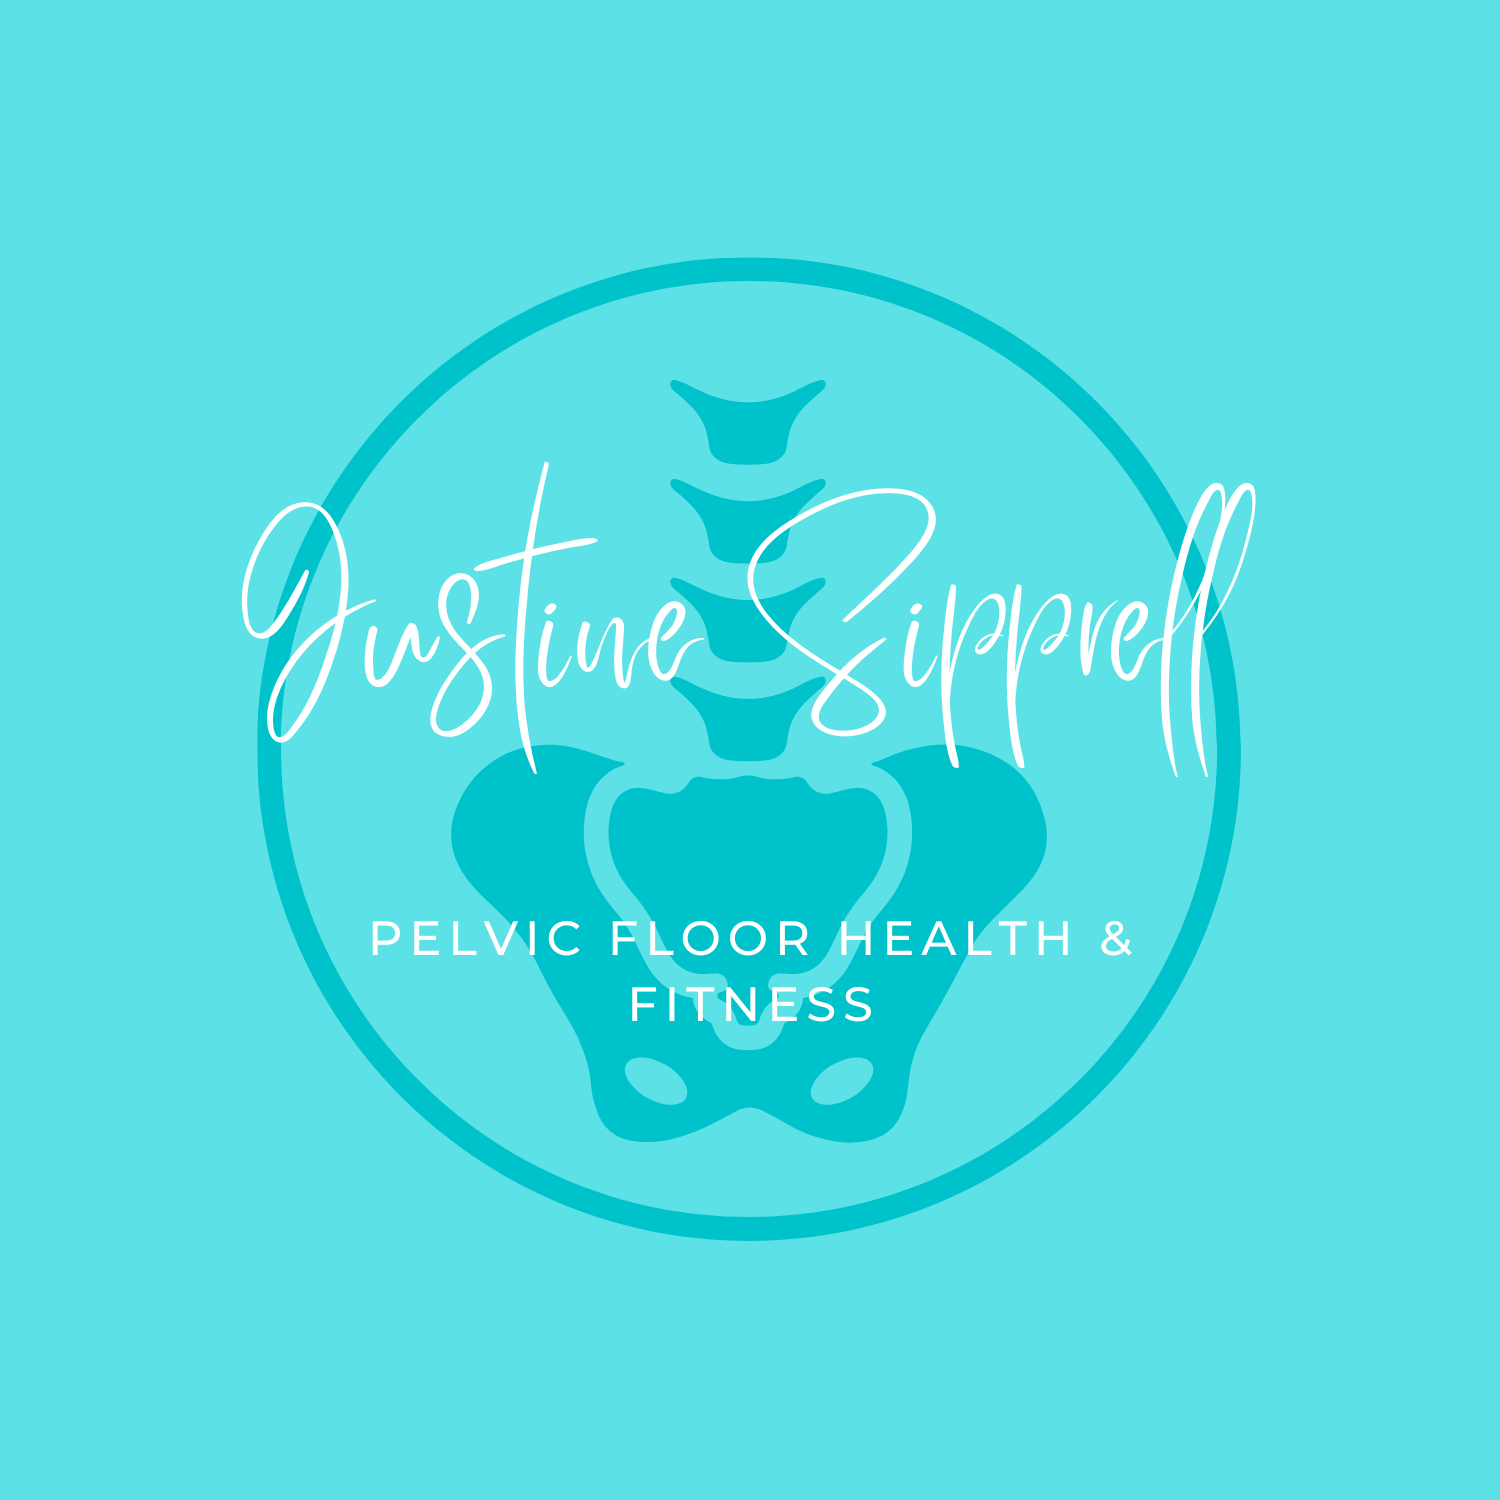 Pelvic Floor Specialist | Combined Hypopressive Therapy for incontinence, prolapse, hernias, diastasis &amp; haemorrhoids